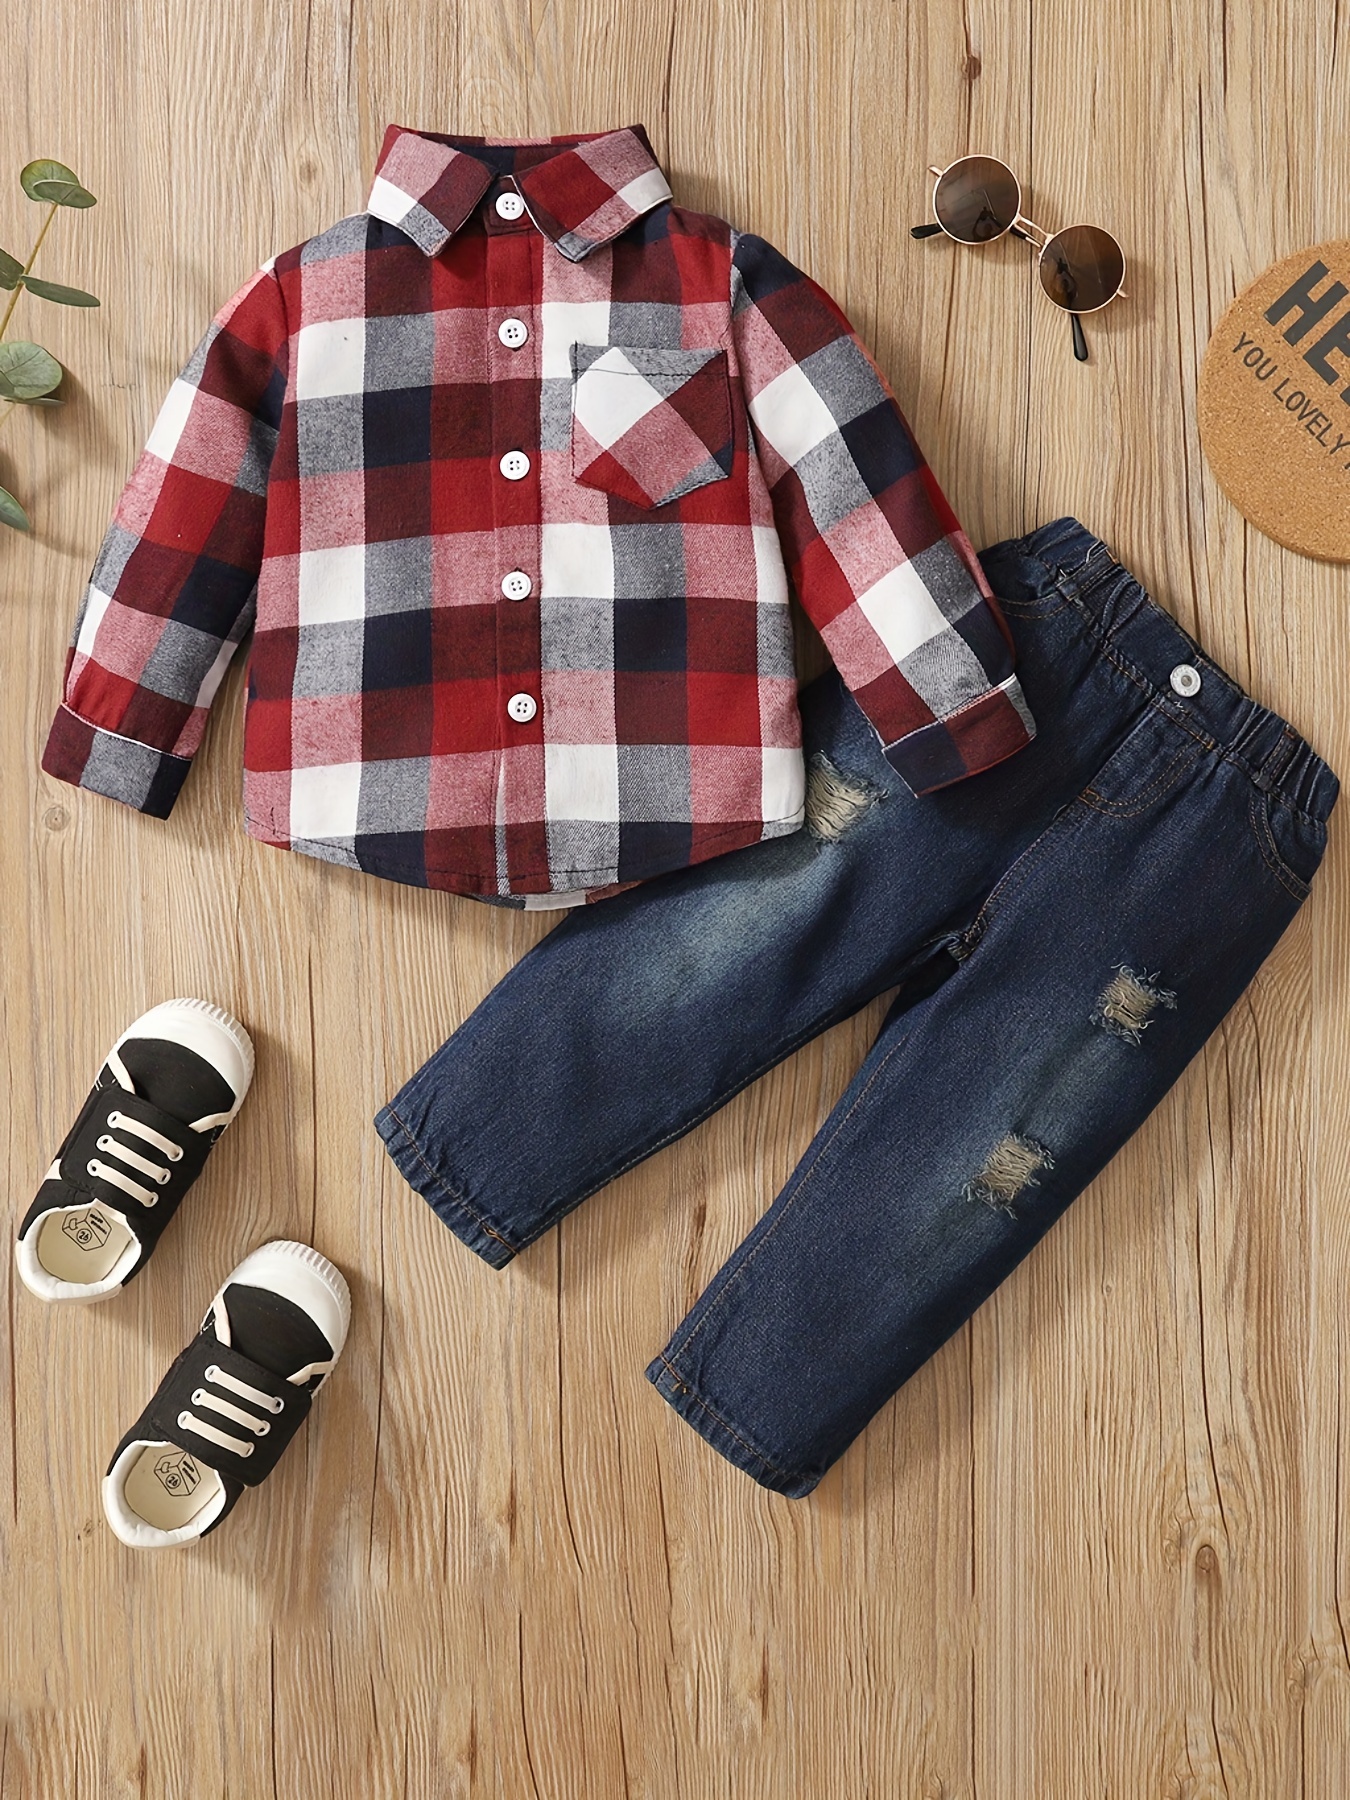 Red Jeans Denim Top  Red jeans outfit, Everyday fashion outfits, Fashion